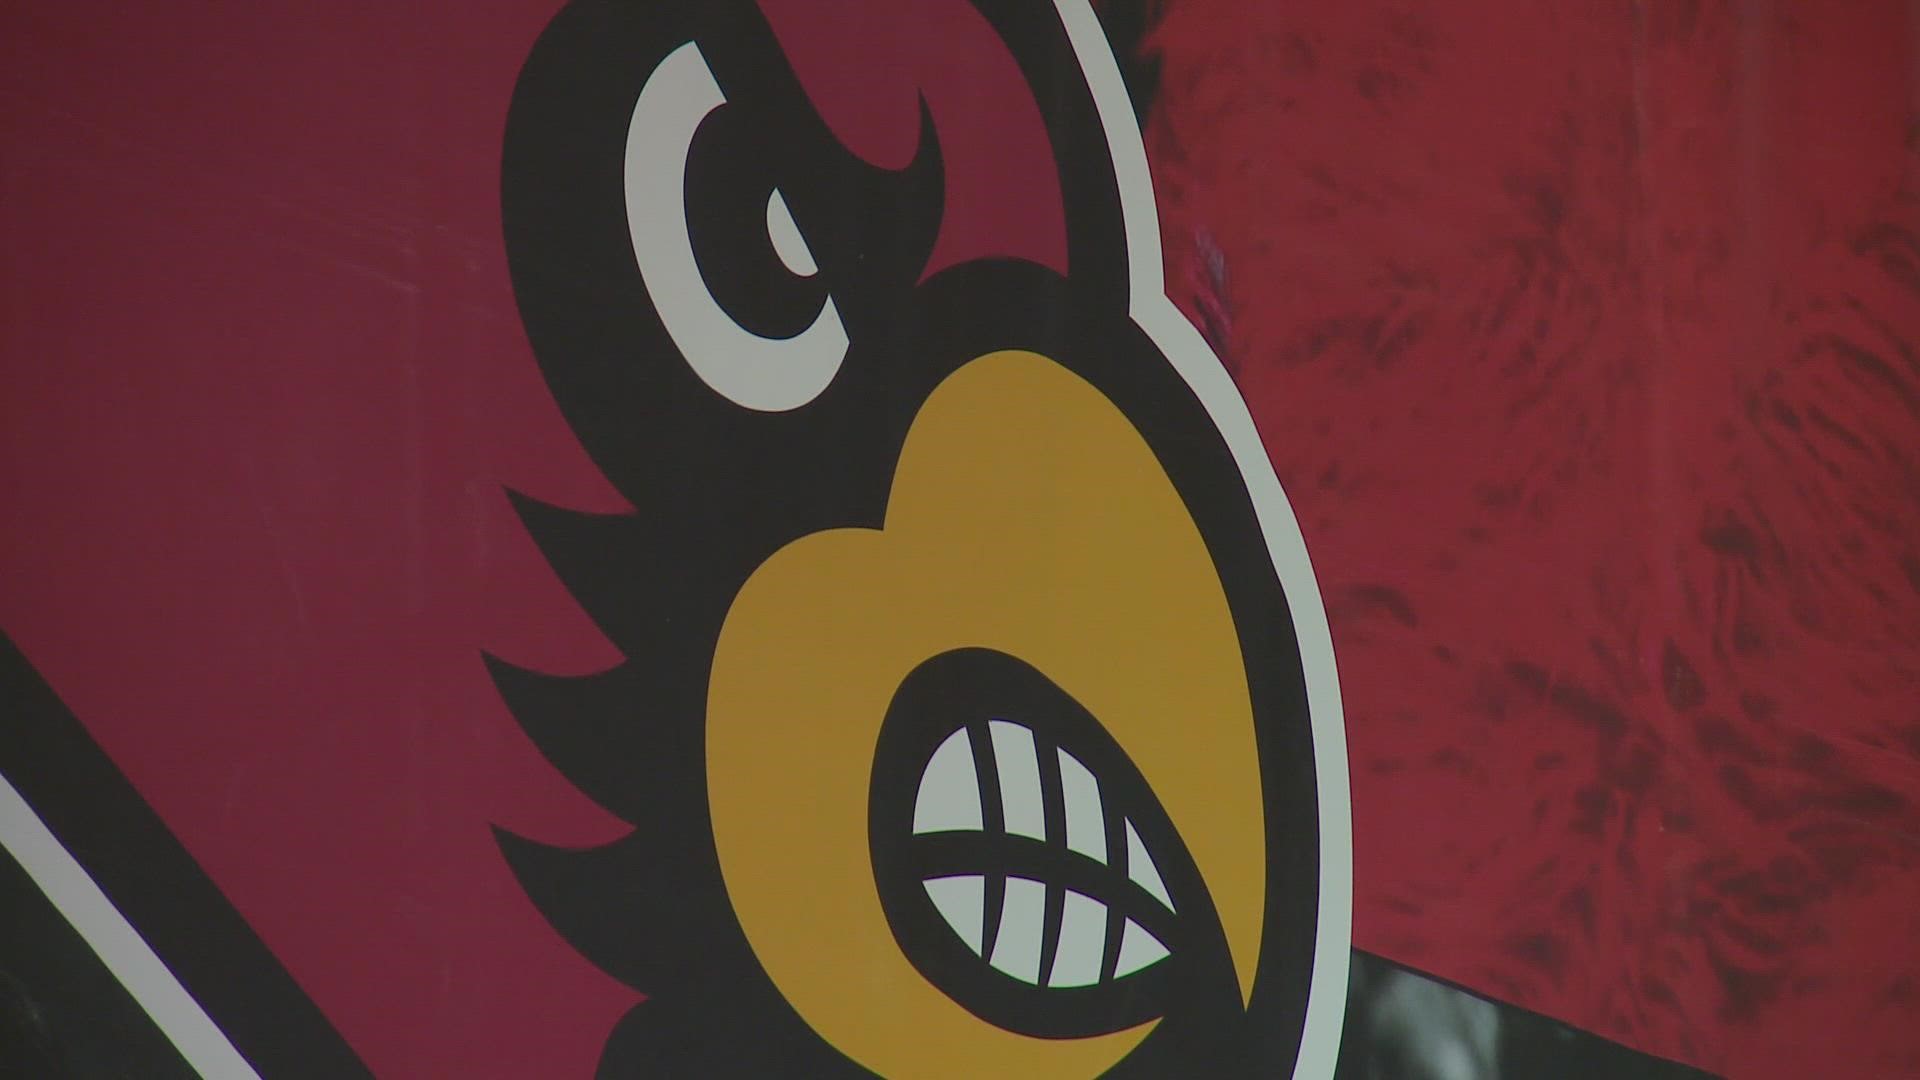 A deep dive into the UofL punishments handed out and what the university did to deserve them.